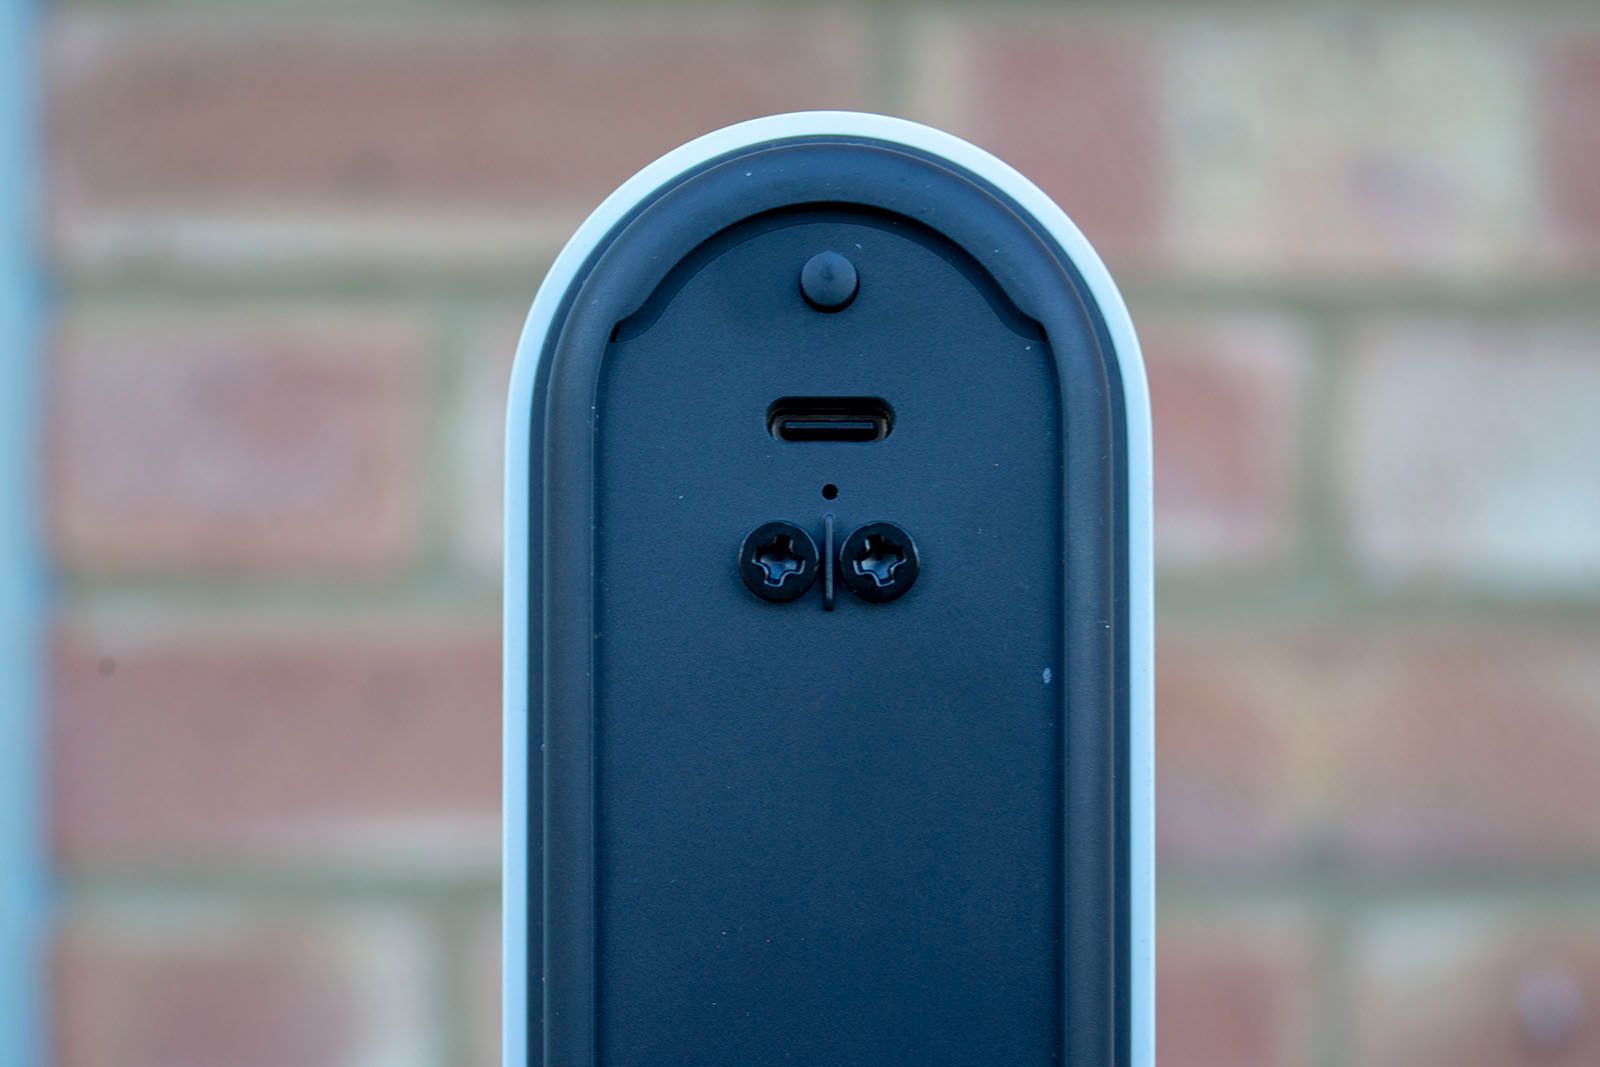 Google Nest Battery Doorbell review: A great Ring competitor photo 13